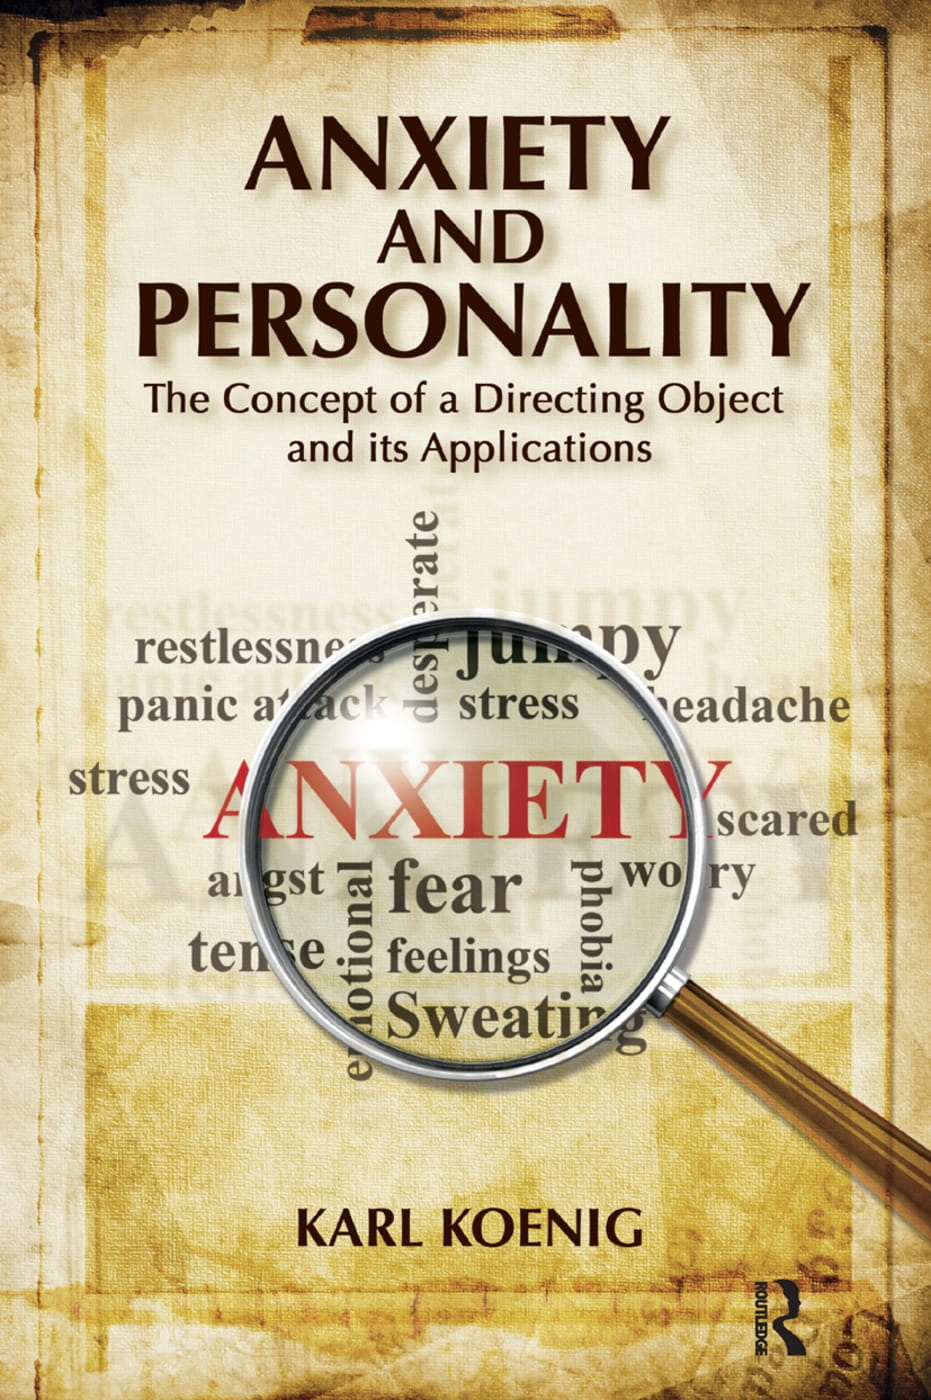 Anxiety and Personality: The Concept of a Directing Object and Its Applications